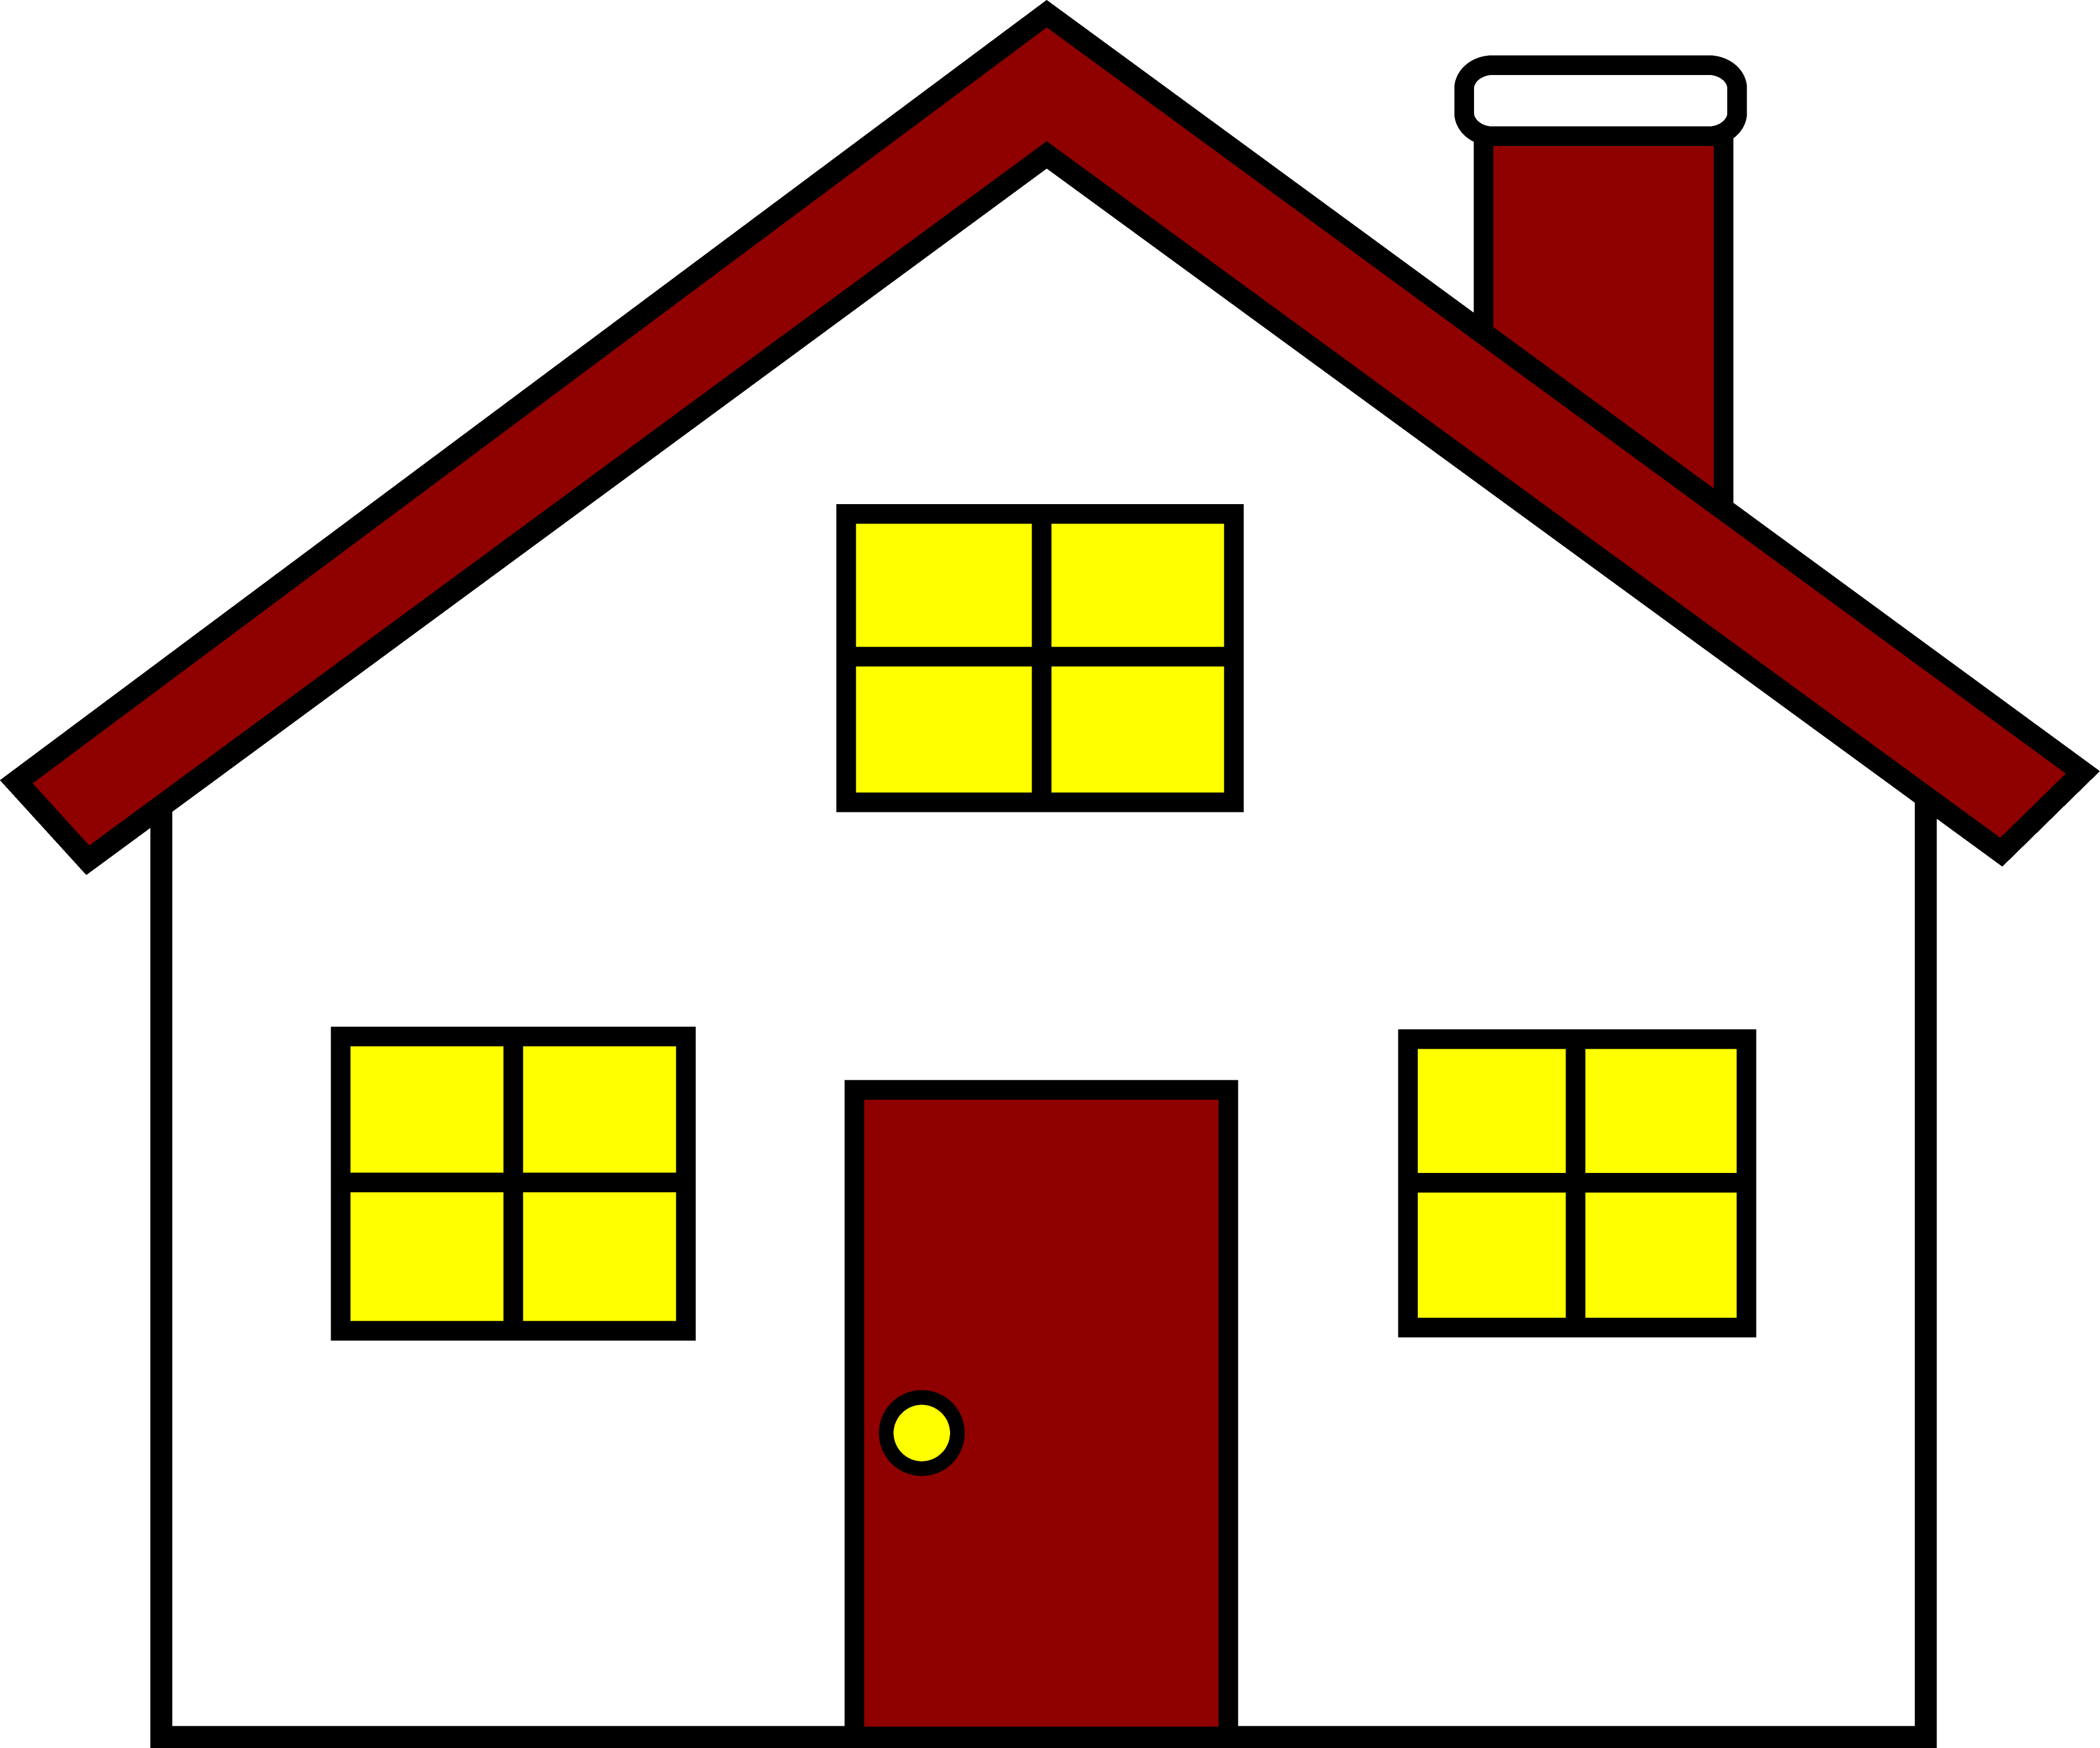 Cute House Clipart   Clipart Panda   Free Clipart Images